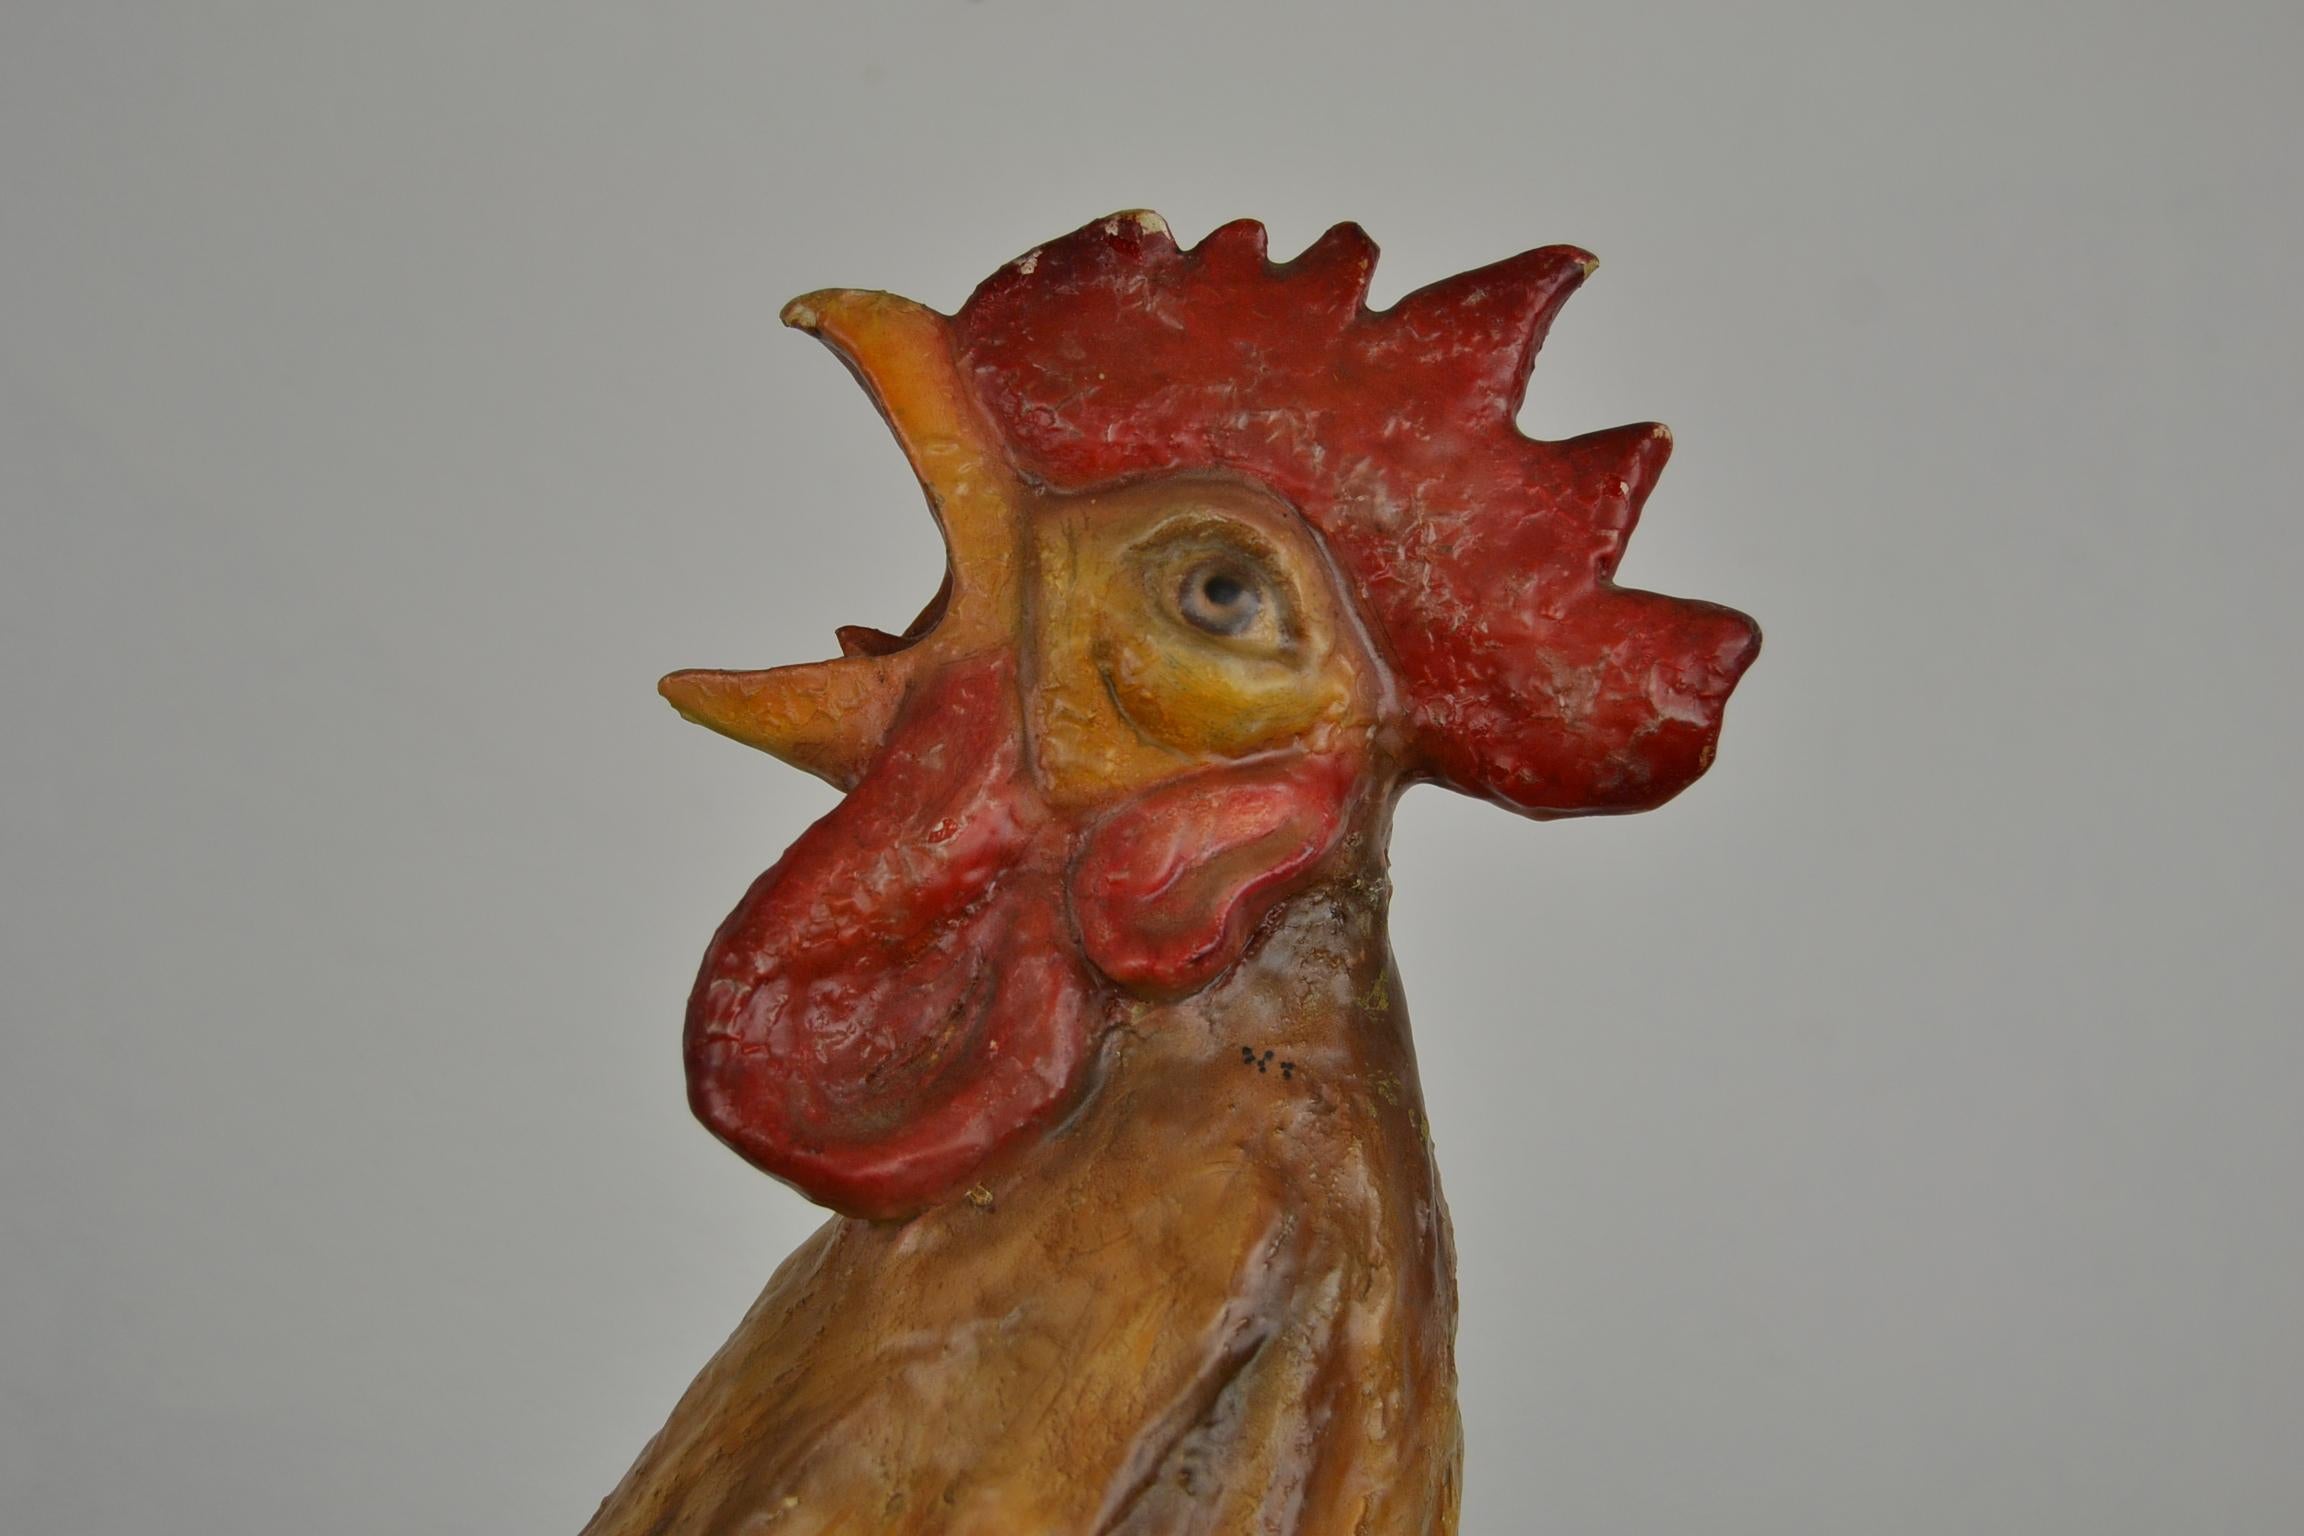 Large vintage paper mache rooster. 
This cock with beautiful red crest is a great decorative object by his size. 
It's an animal sculpture of papier mâché which is very detailed. 
He's also is hand-painted and finished with a kind of gloss layer.